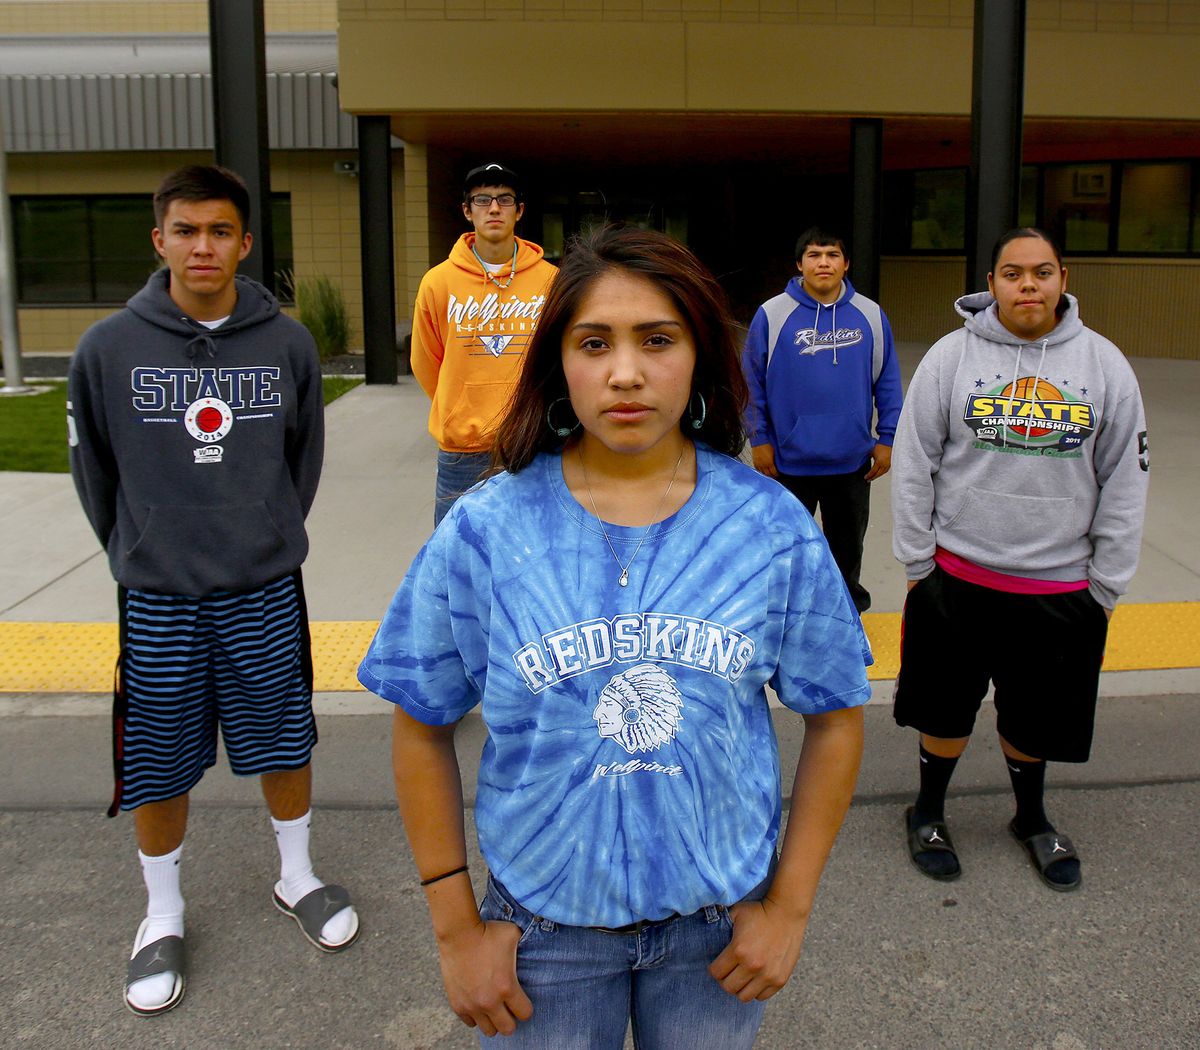 From left, James Best, 18; Brodie Ford, 17; Kyra Antone, 17; Triston Andrews, 17; and Sami Parr, 19, attend Wellpinit High School. The school serves the Spokane Indian Reservation, and its mascot is the Redskins. (Mark Harrison / The Seattle Times)